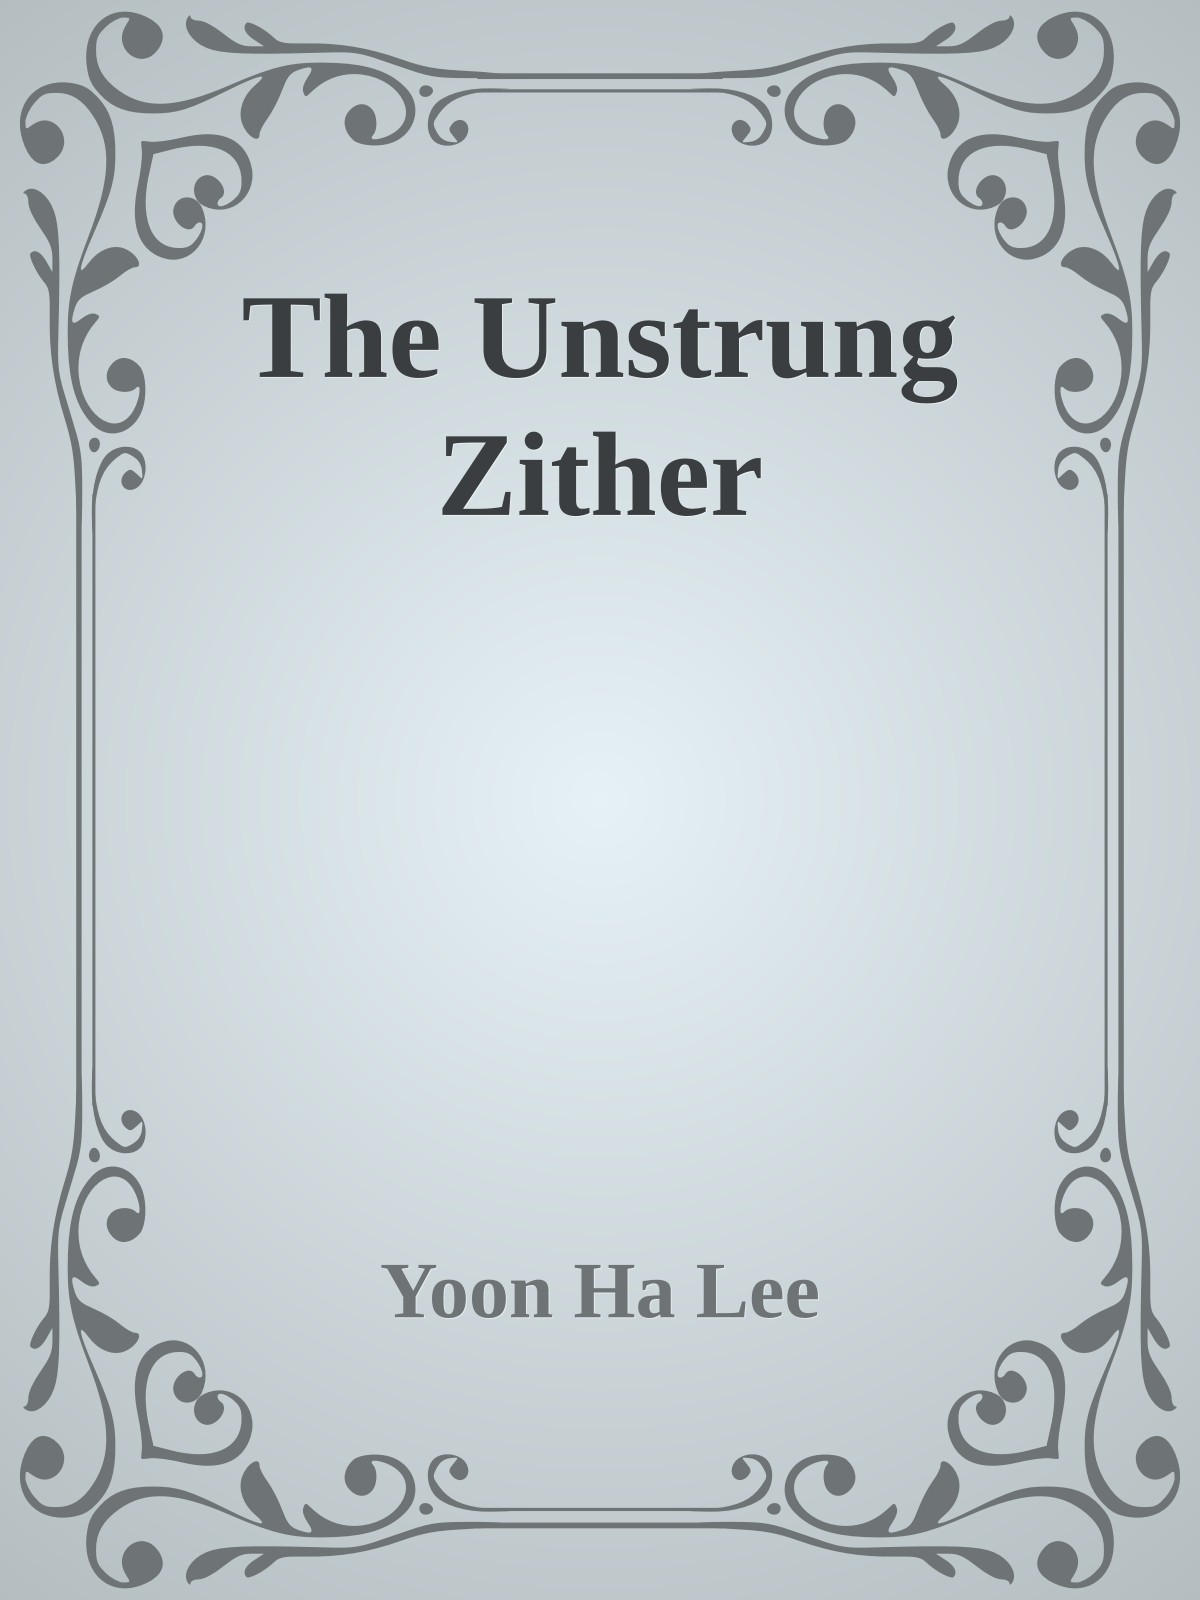 The Unstrung Zither